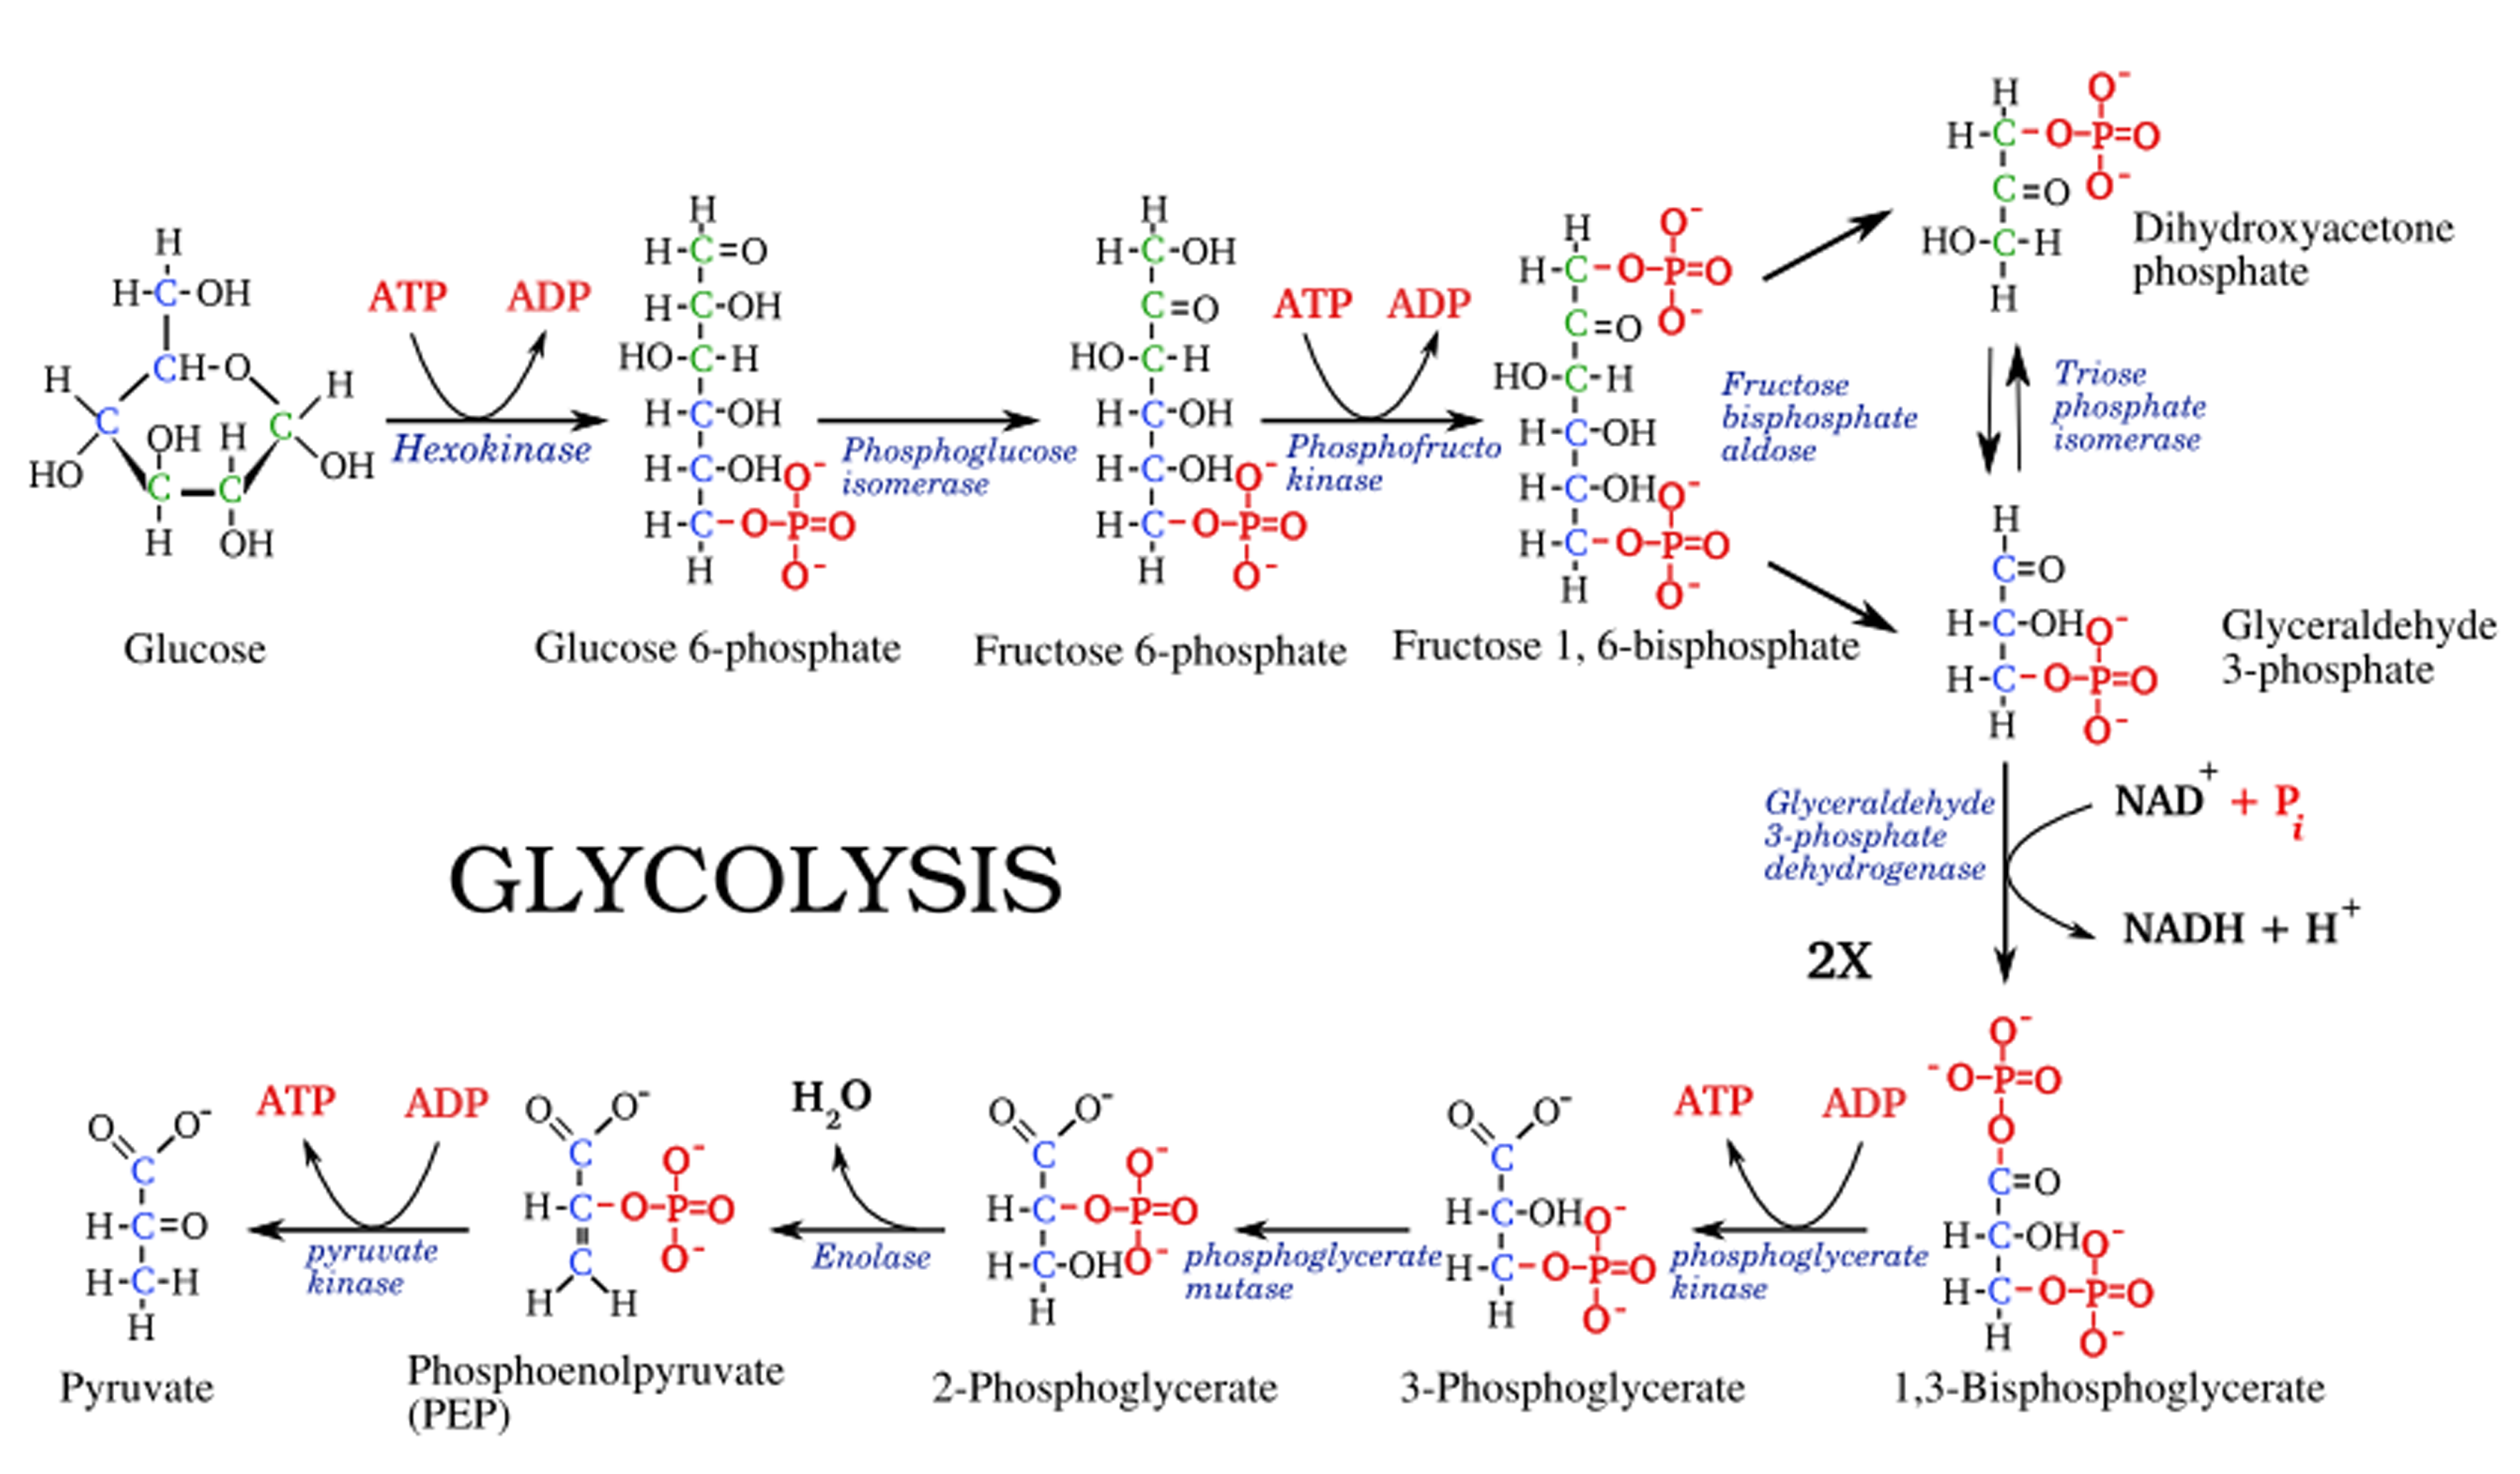 what is the end product of glycolysis